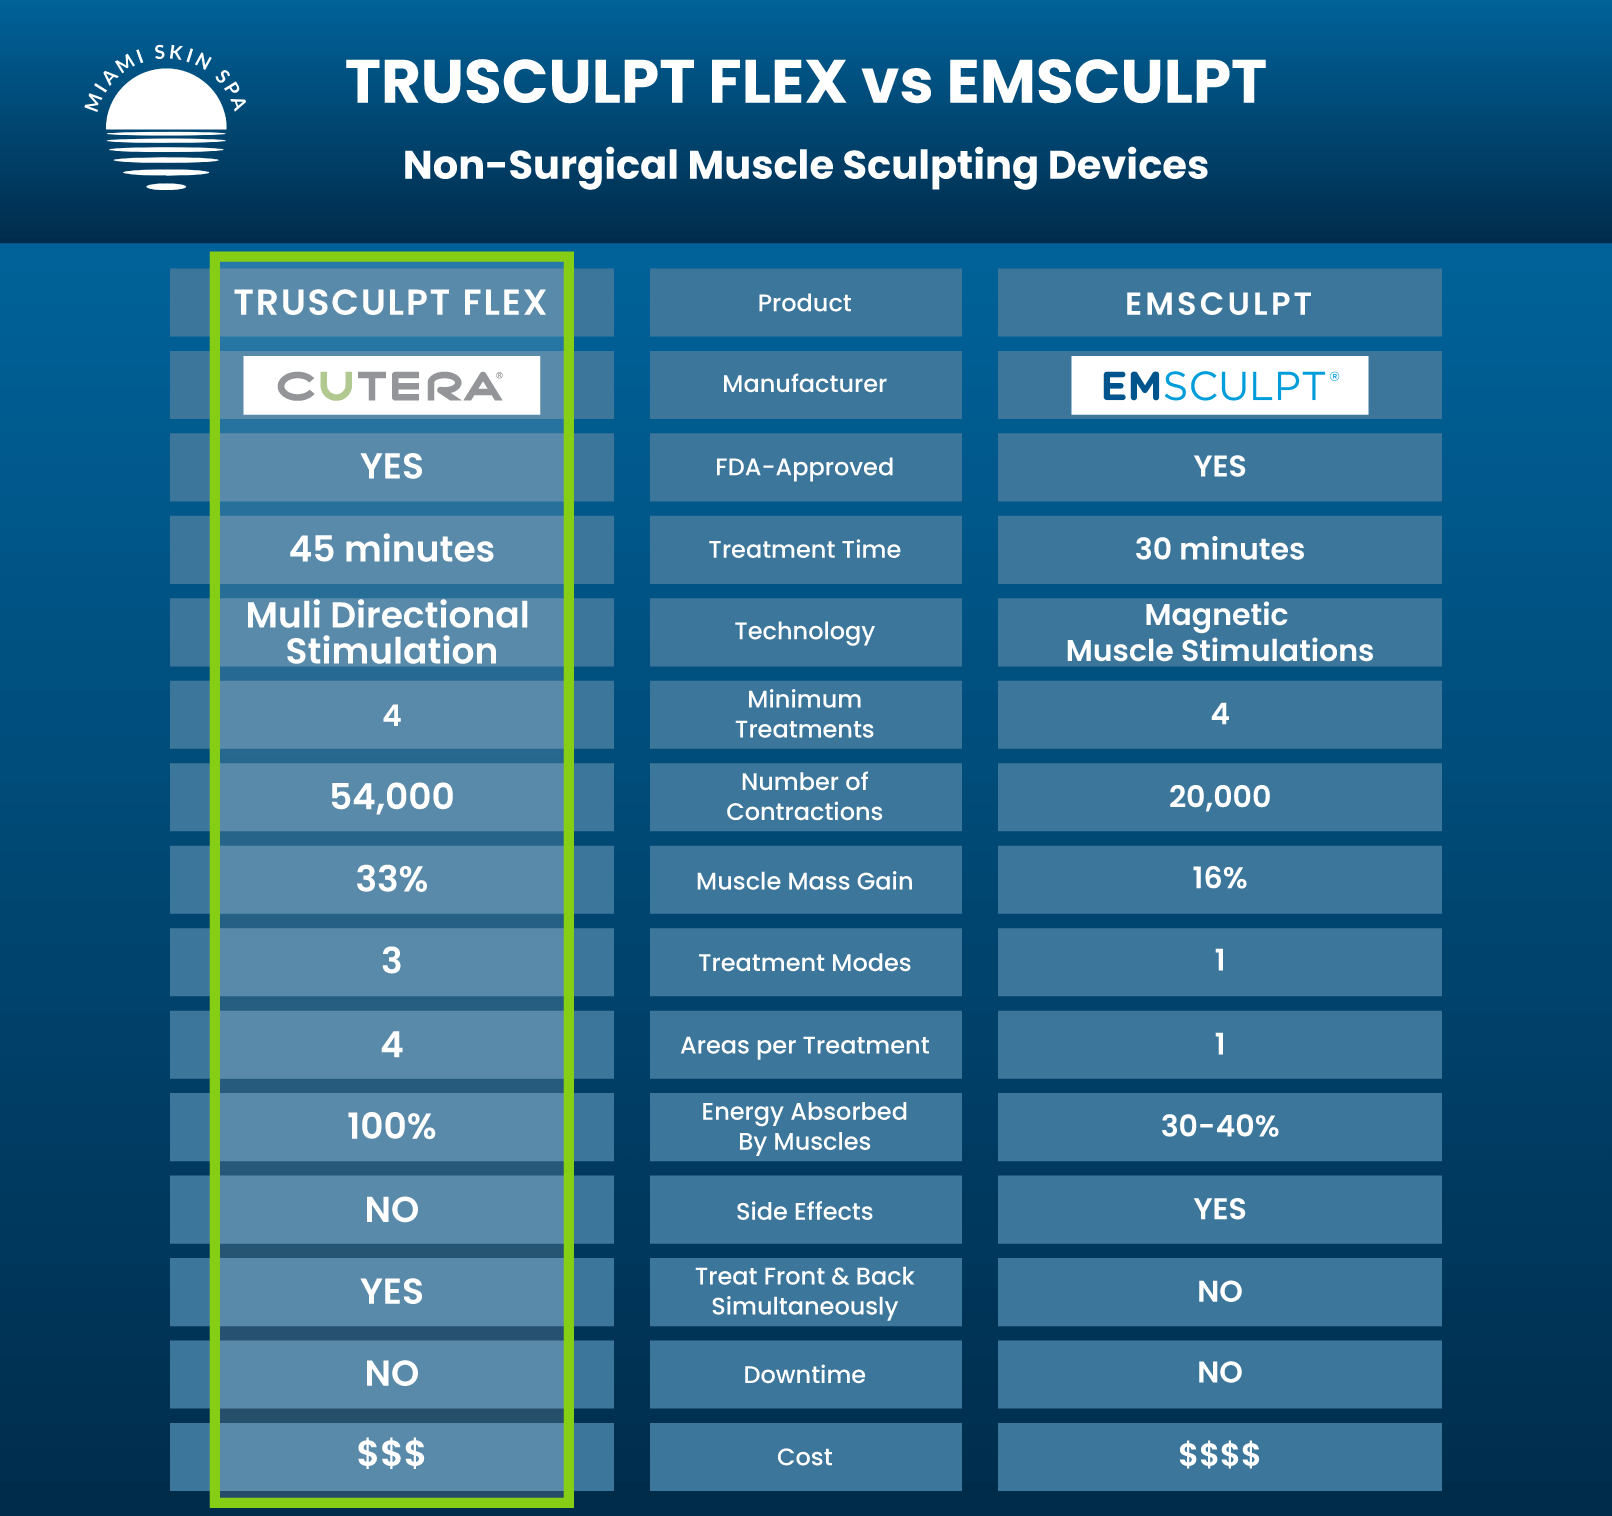 A tbale comparing the statistics of twpo of the most popular muscle scultping devices, the EMSculpt and the truSculpt fleX